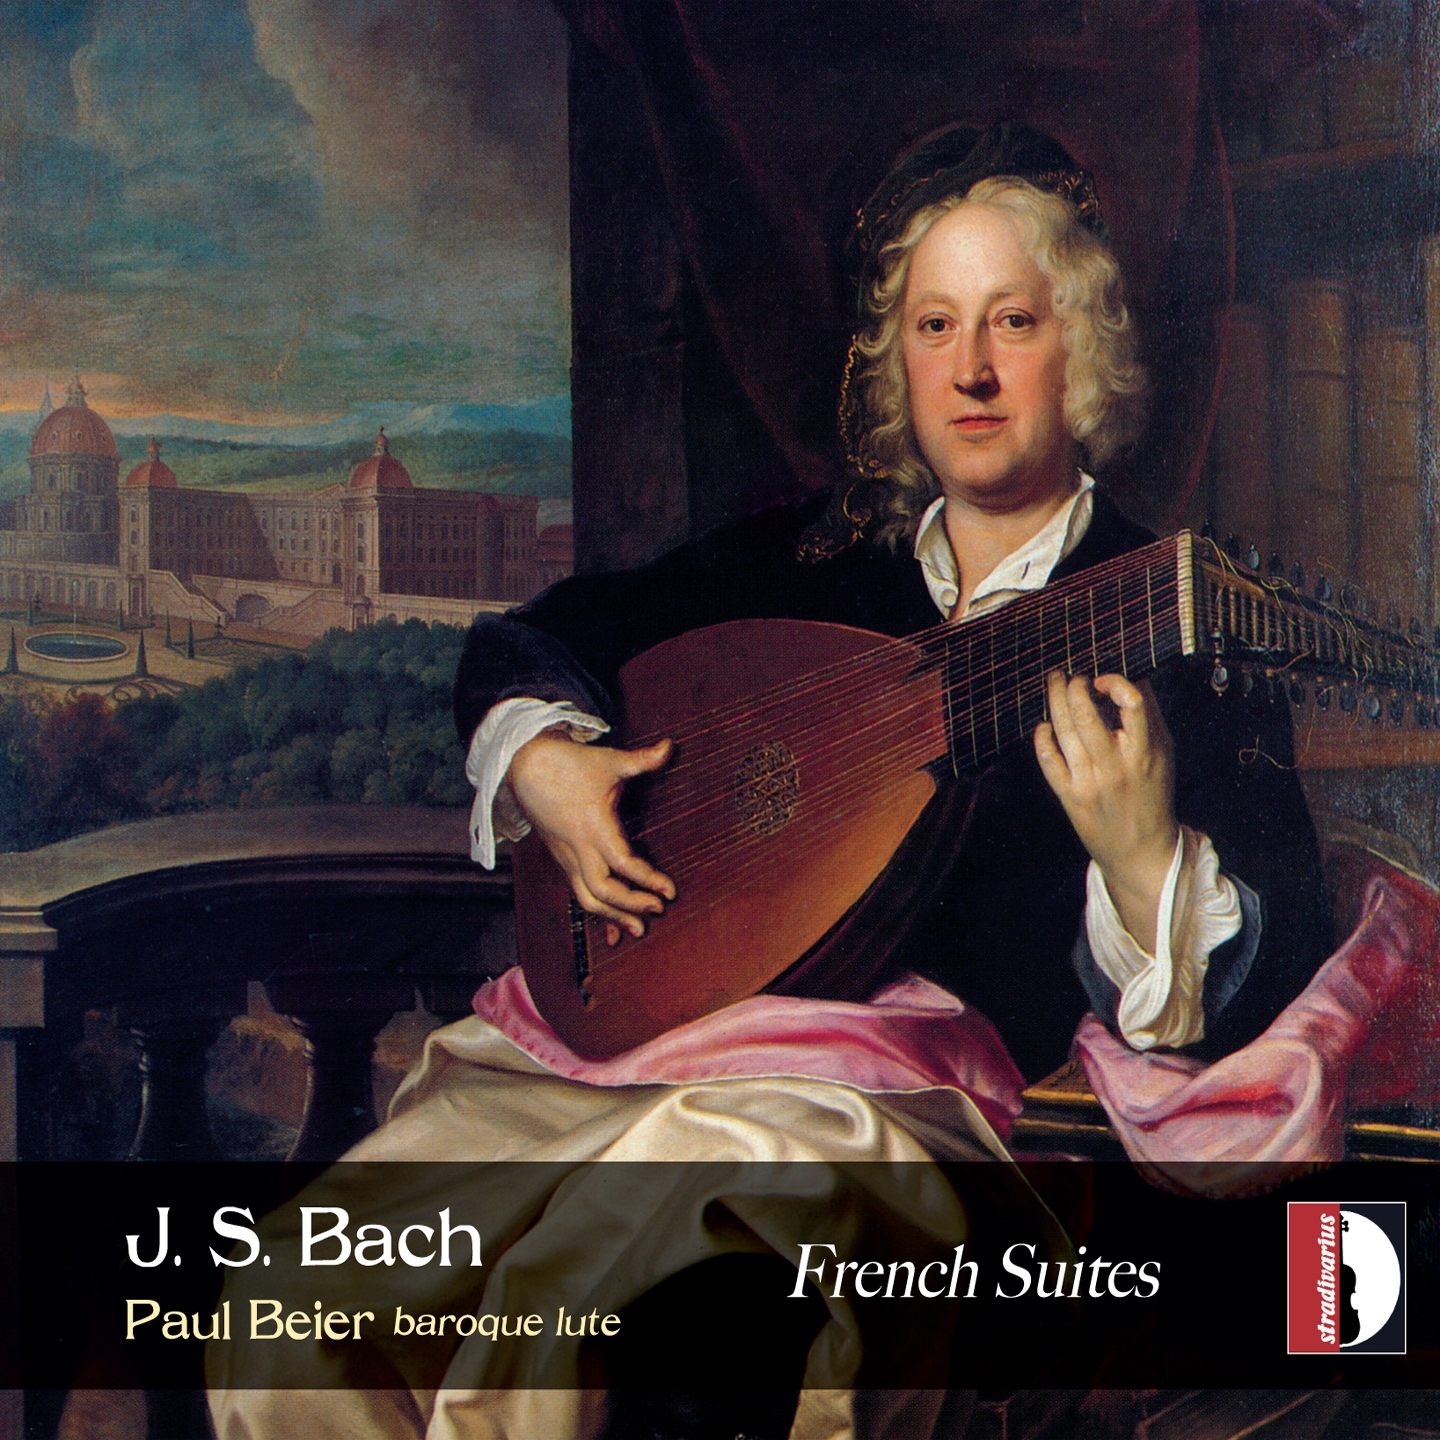 6 French Suites, No. 4 in D Major, BWV 815: VII. Gigue (Transcription for Lute)